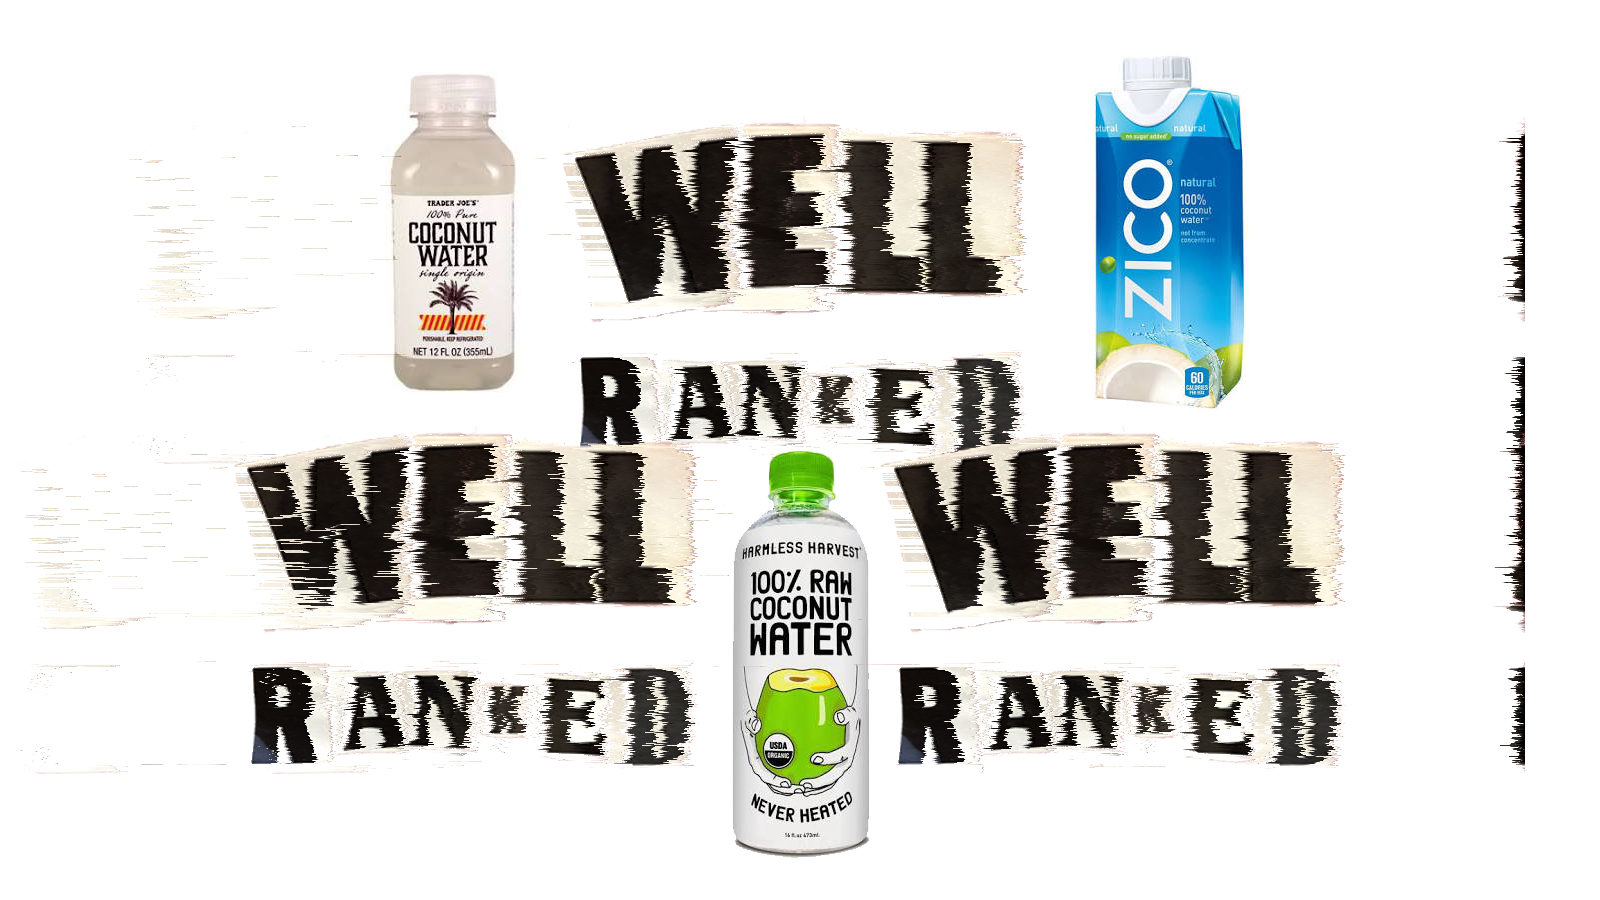 Well-Ranked: Coconut Water